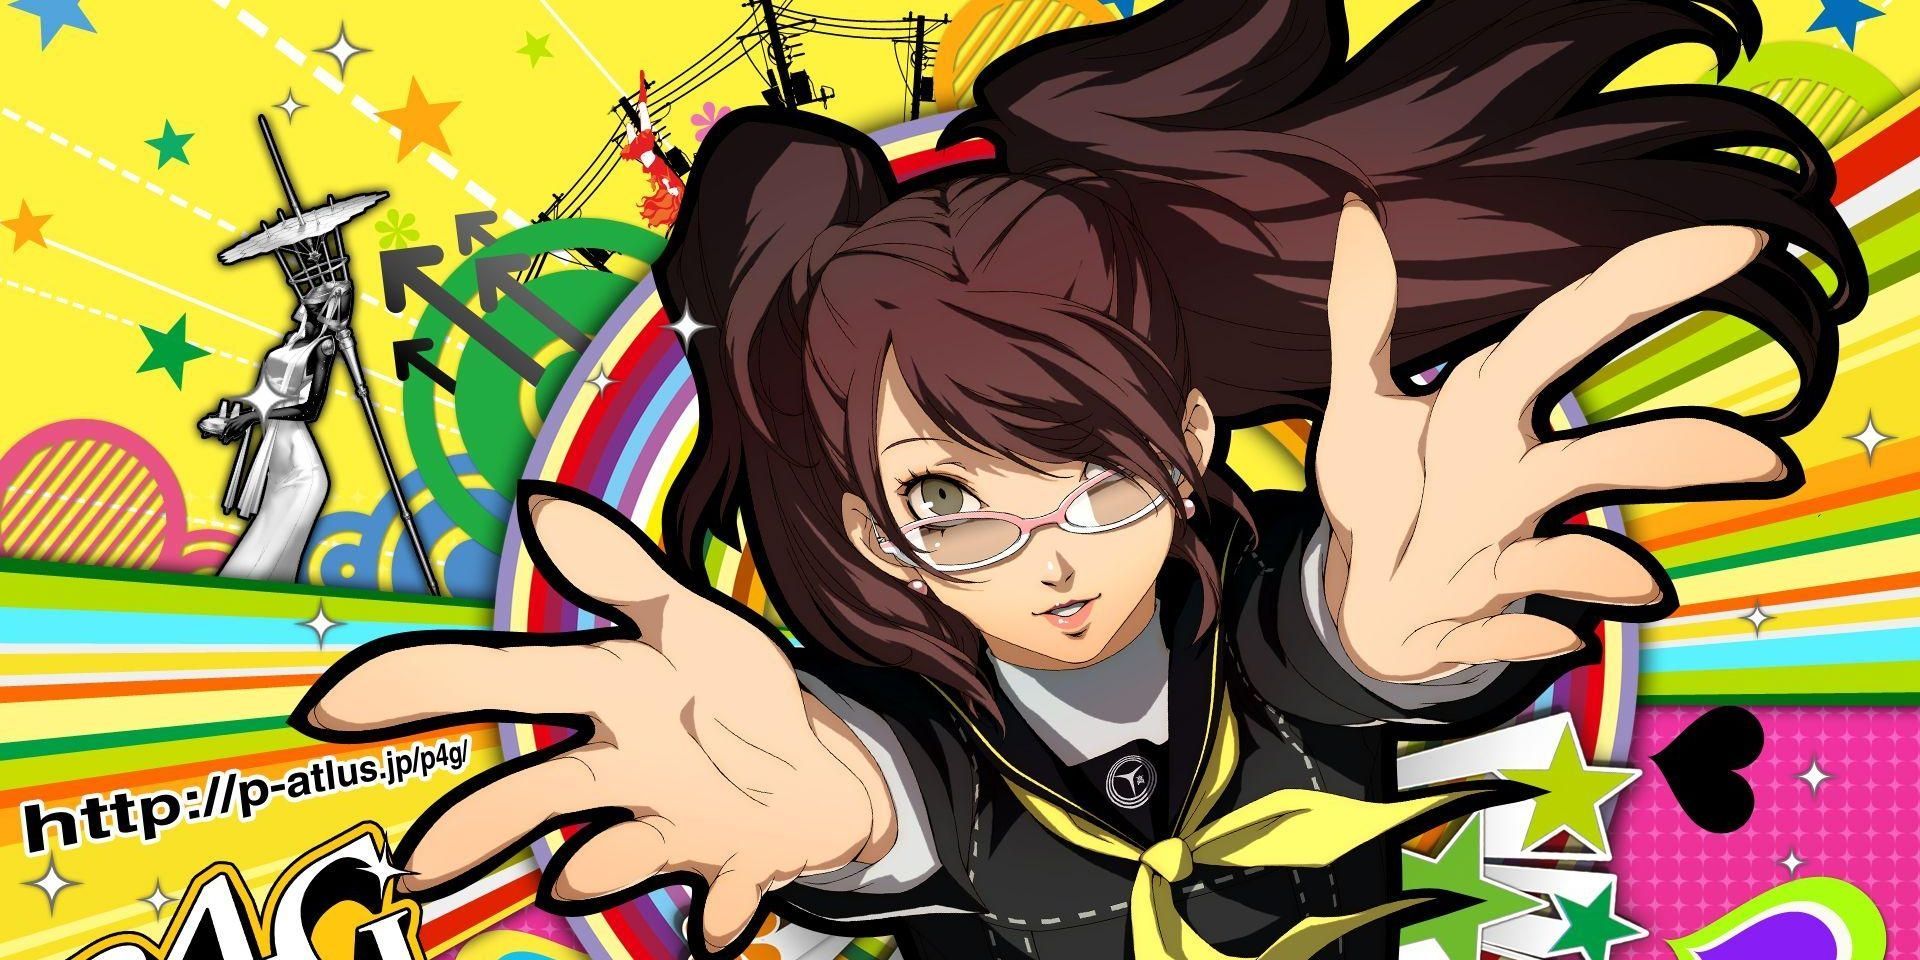 Rise in Persona 4 Golden